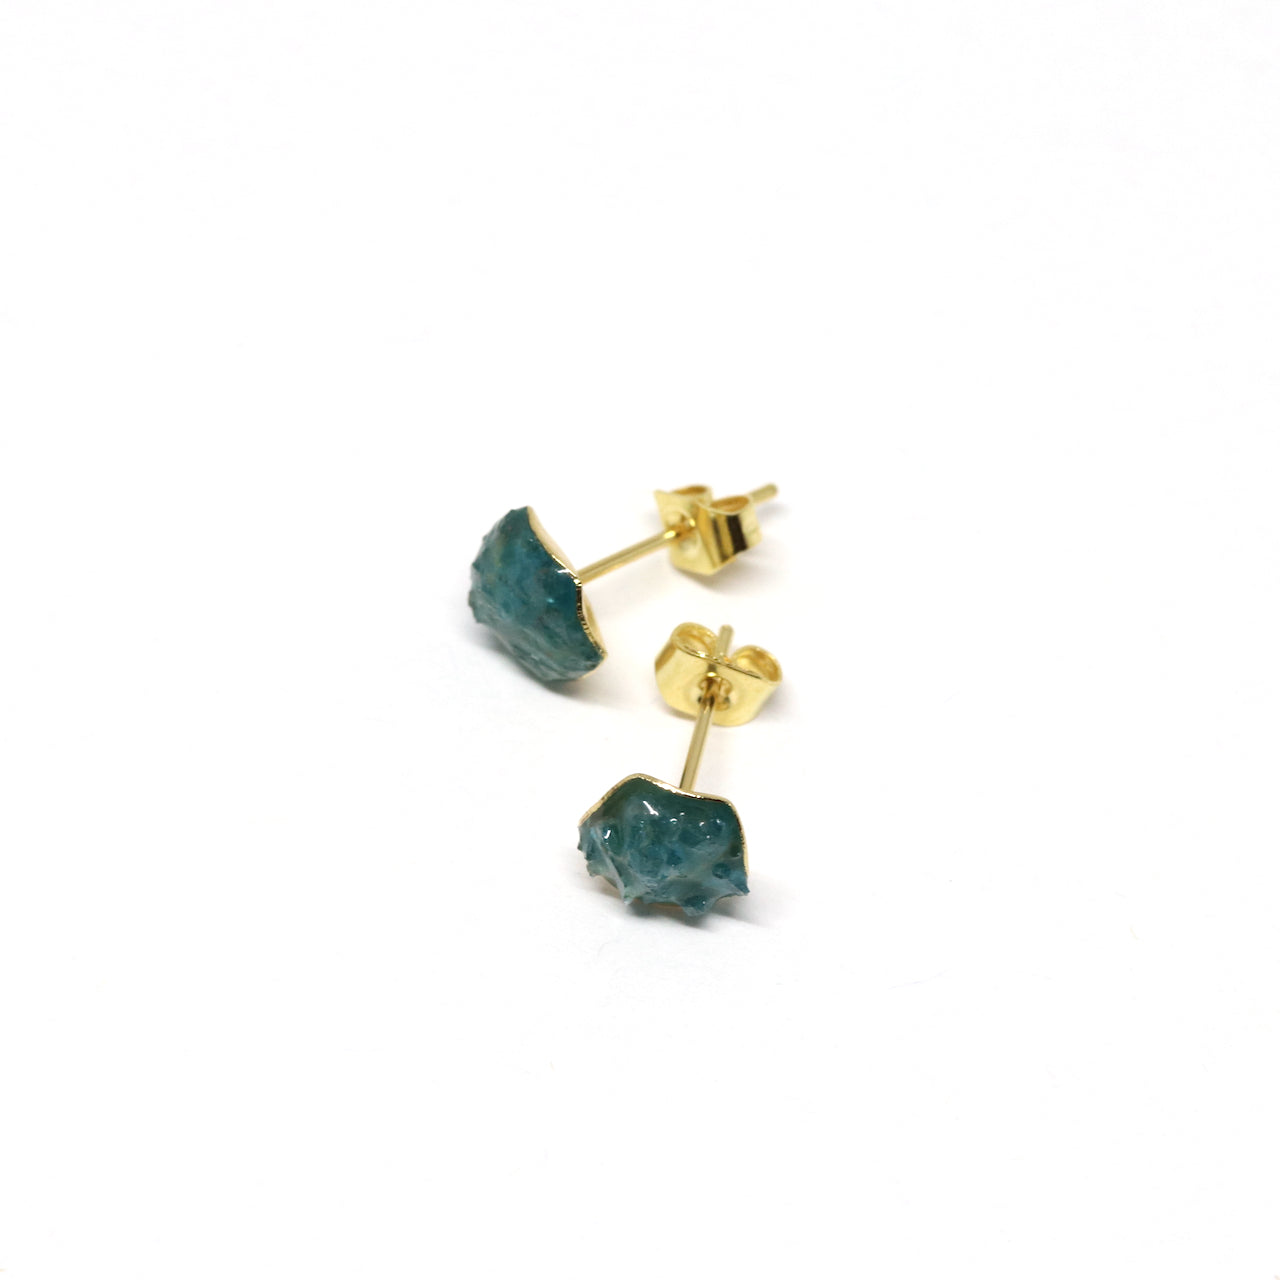 Gemstone, stud earrings. Made in Wanaka. Unique, colourful jewellery designed and crafted by New Zealand artist and jeweller Briar Hardy-Hesson.